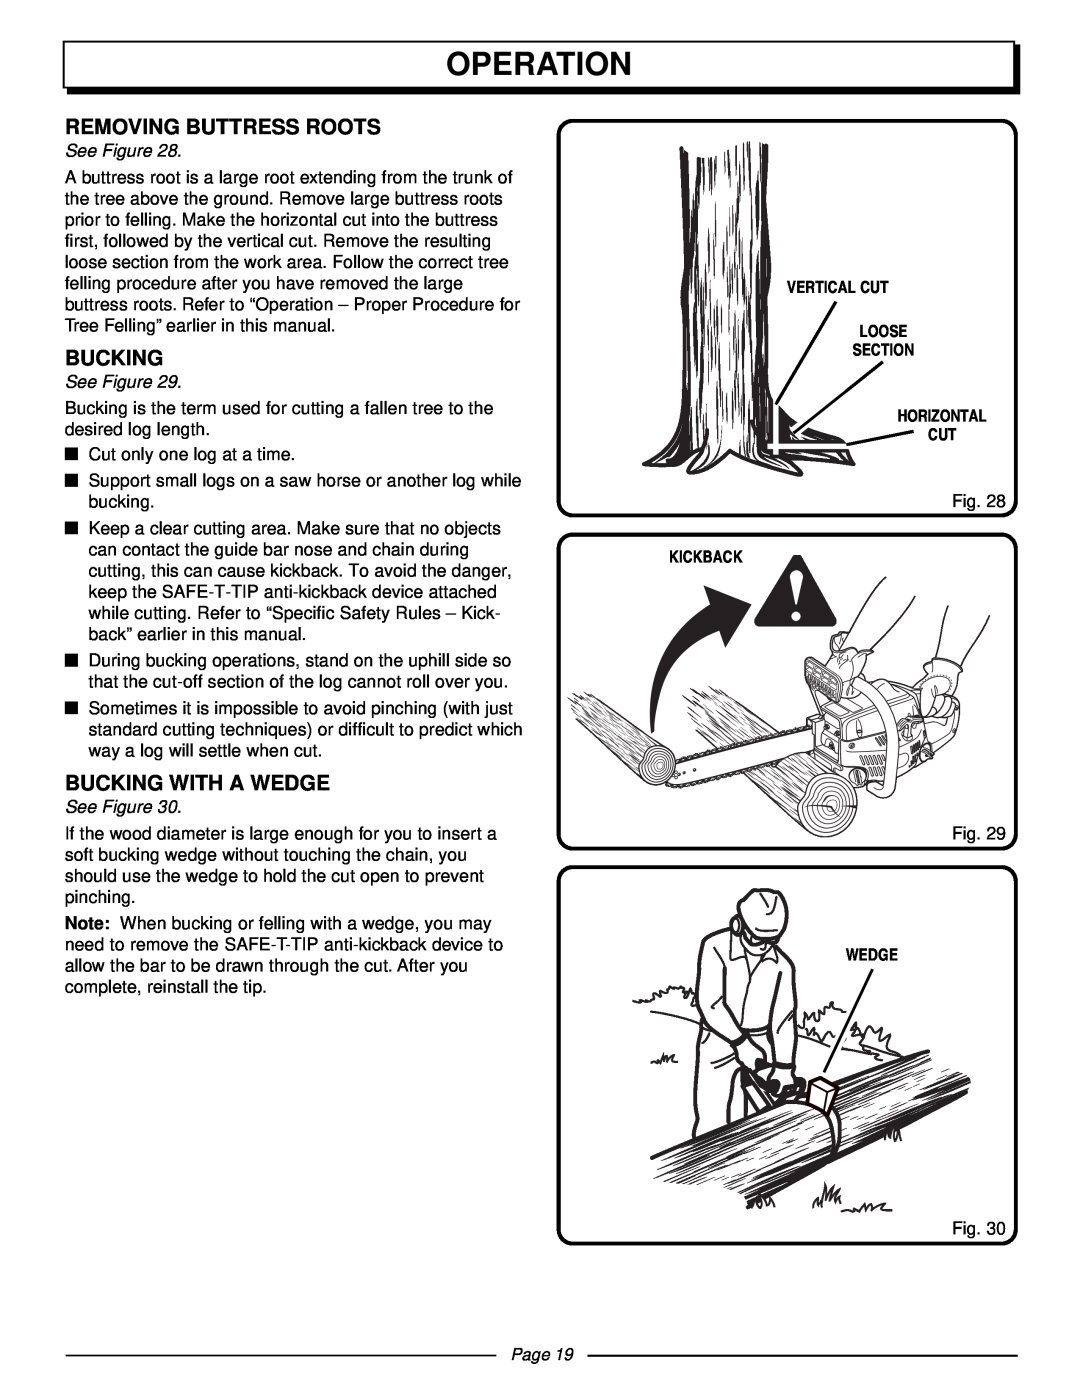 Homelite UT10510 manual Removing Buttress Roots, Bucking With A Wedge, Operation, See Figure, Page 